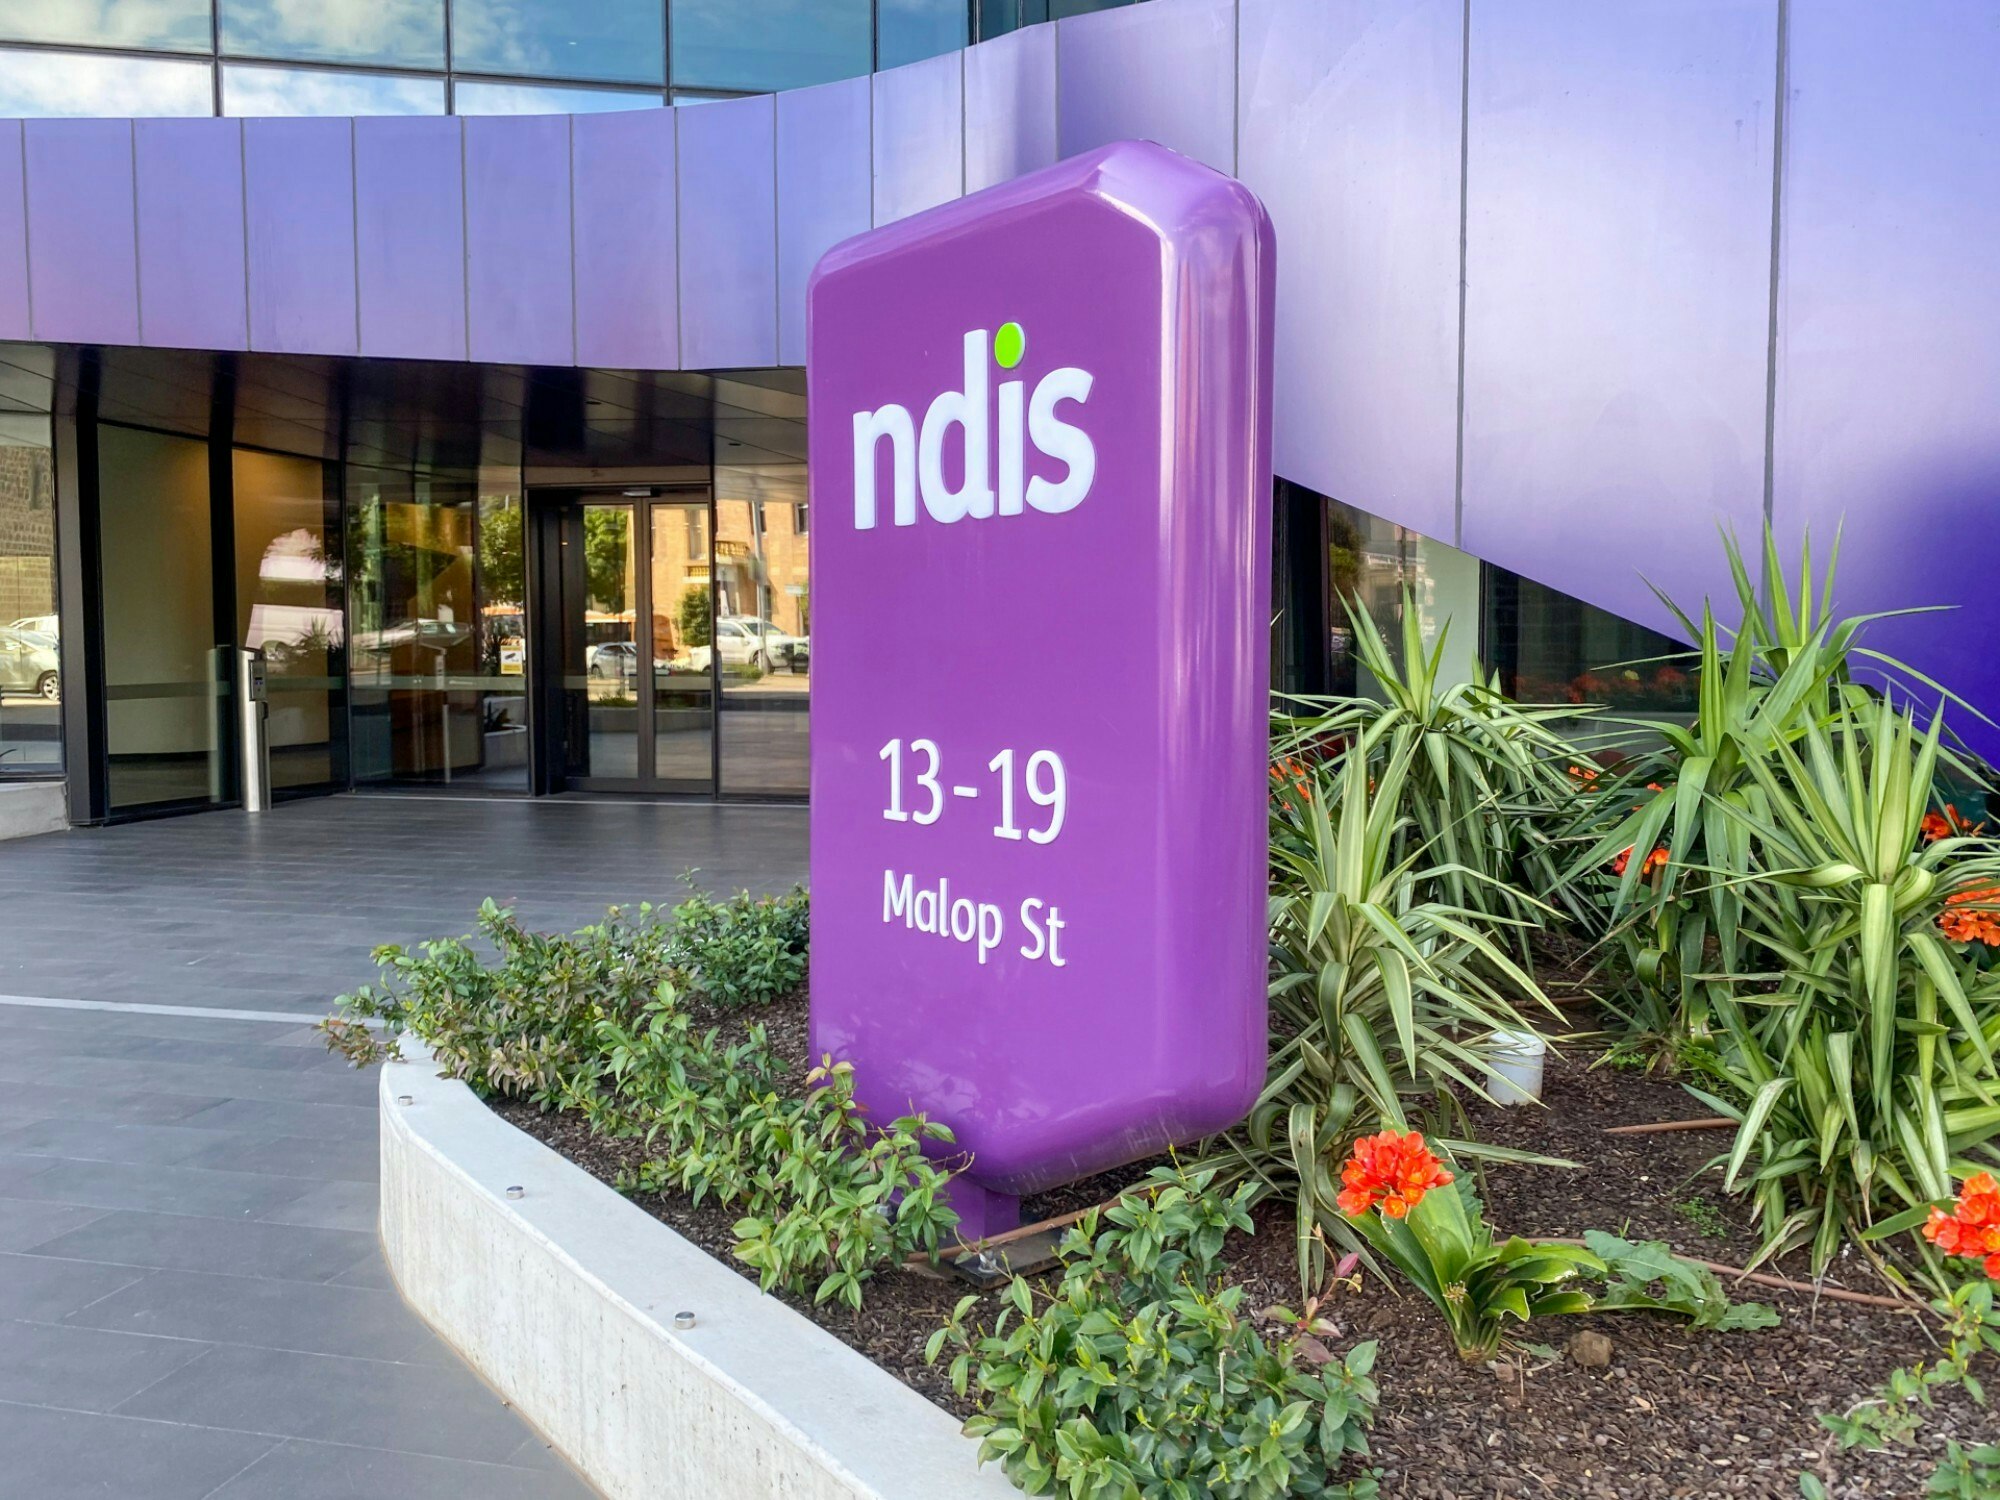 <p>The new NDIS Bill as it stands would allow a CEO of the NDIA to change and influence what supports are funded across the scheme. [Source: Shutterstock]</p>
